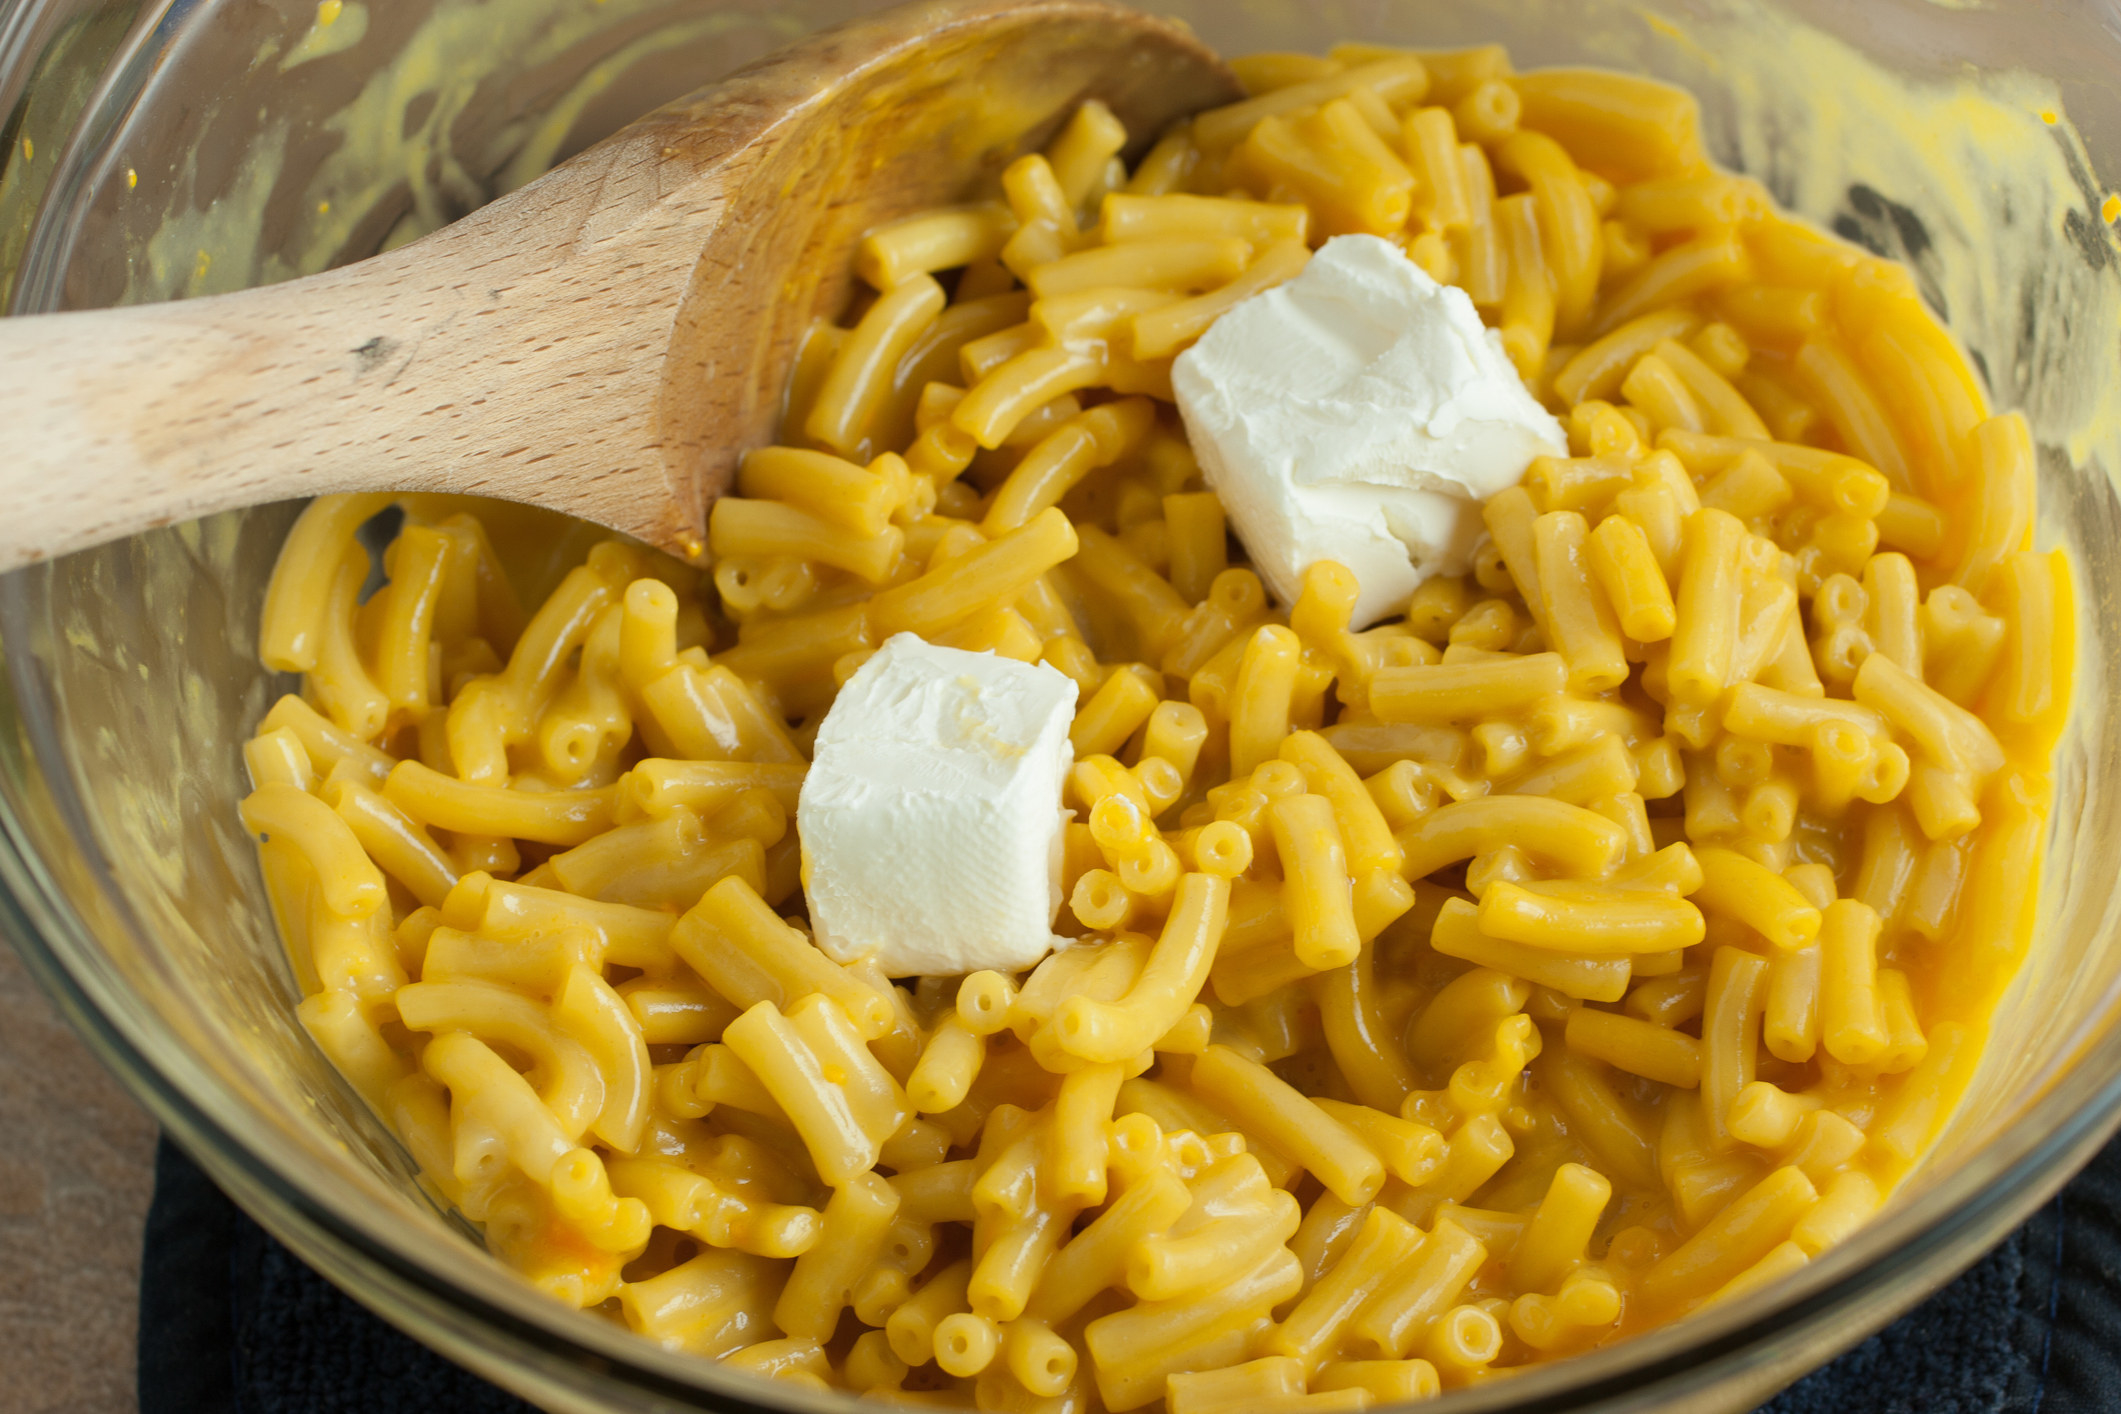 Macaroni and cheese in a bowl with cream cheese chucks.